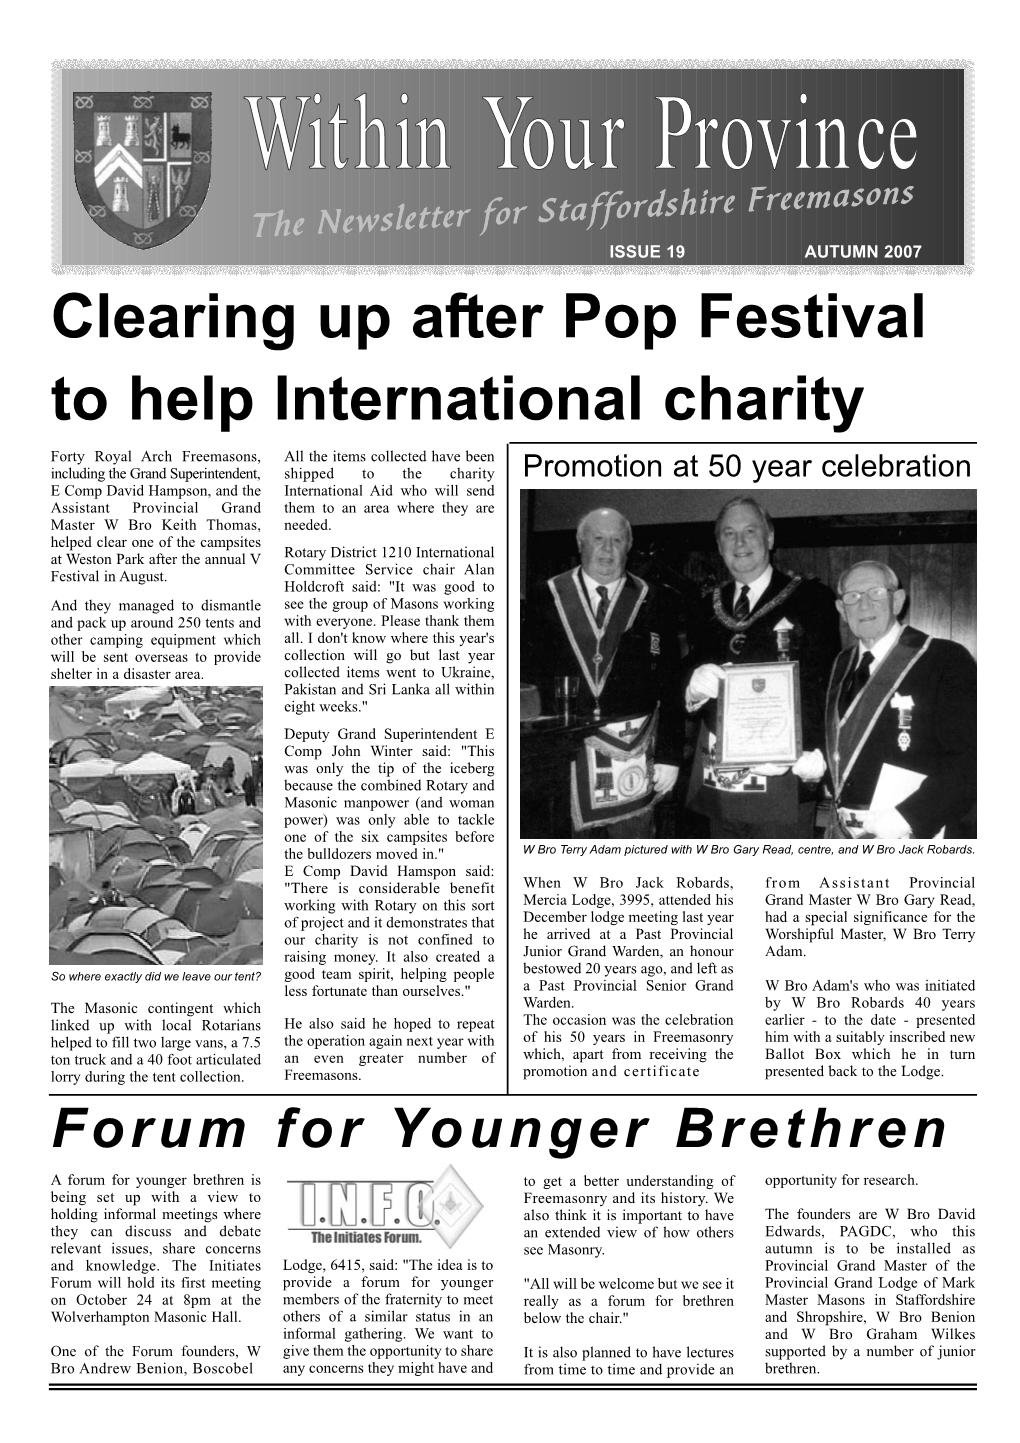 Within Your Province Ffordshire Freemasons the Newsletter for Sta ISSUE 19 AUTUMN 2007 Clearing up After Pop Festival to Help International Charity